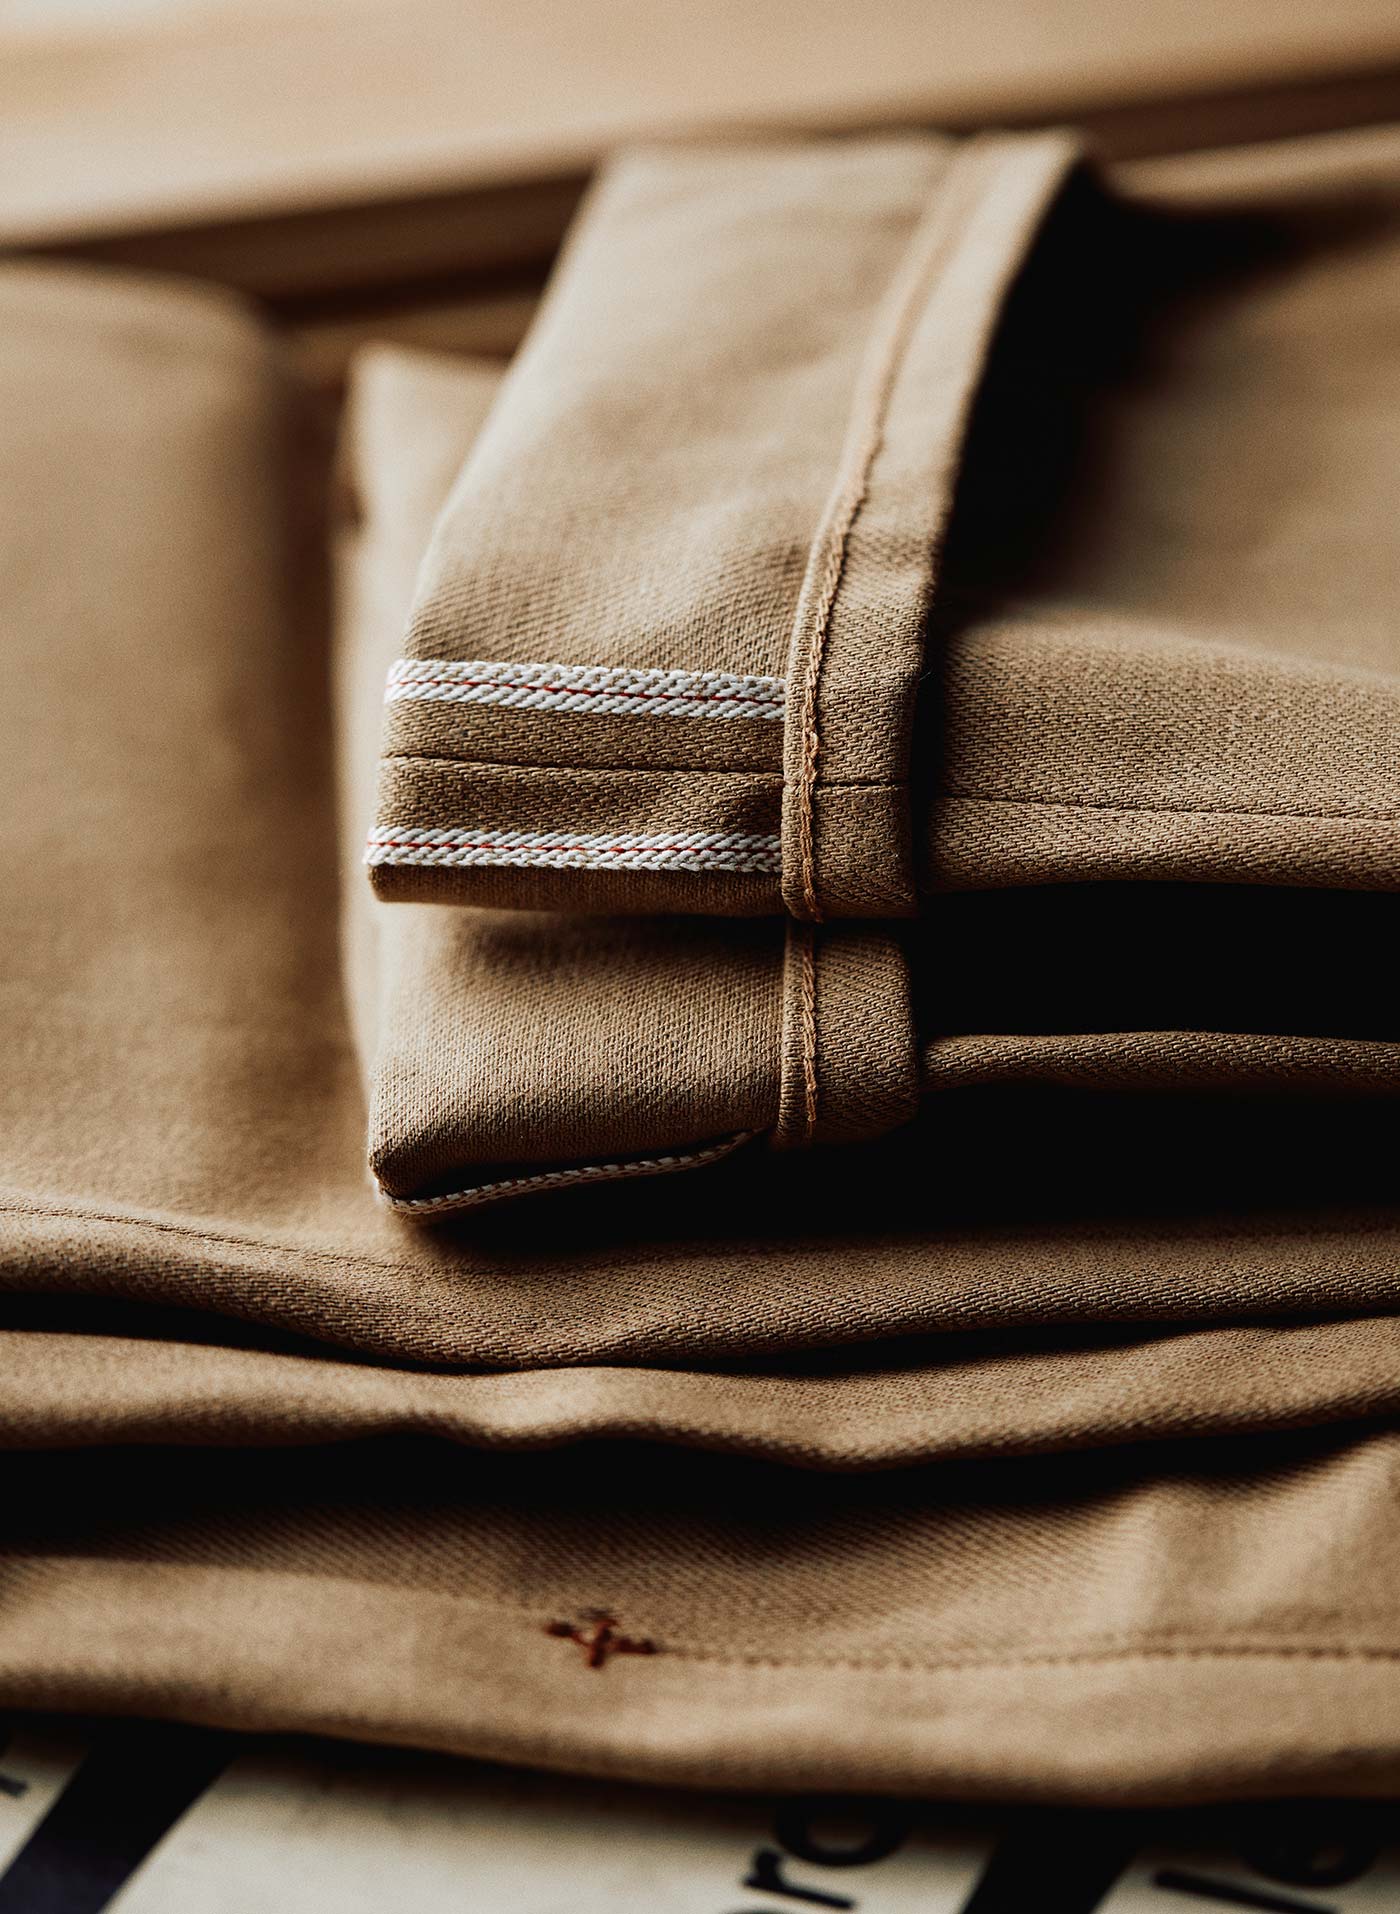 Brown, Textile, Sleeve, Grey, Wood, Beige, Khaki, Material property, Tints and shades, Denim